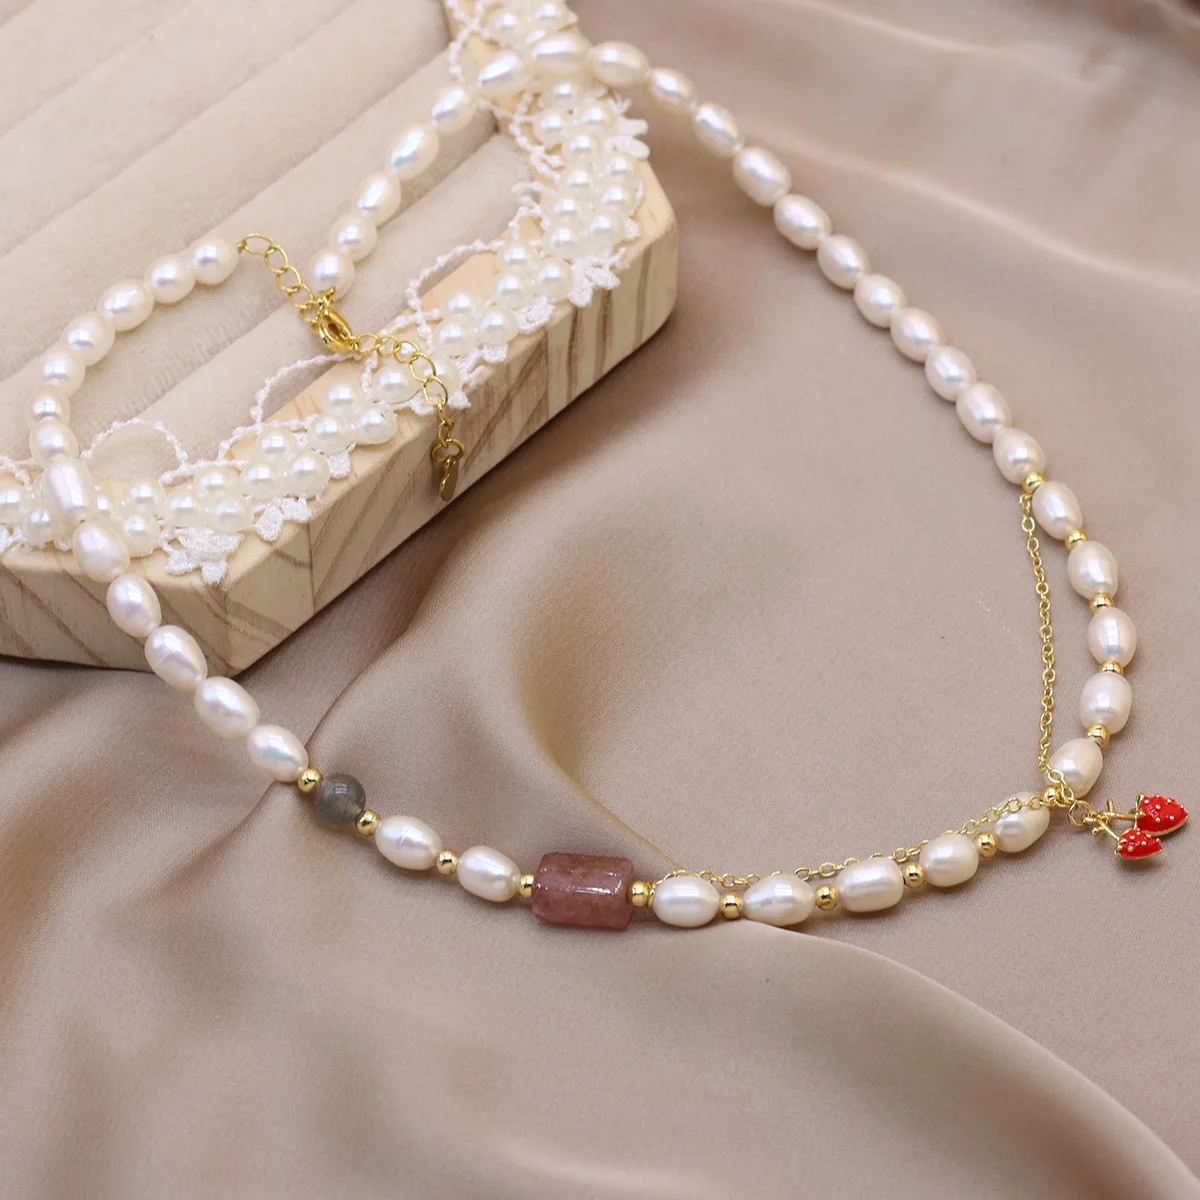 

Natural Pearl Pendant Necklace Irregular Rice Beads Splicing Stone Strawberry Pendant Charm Jewelry Necklace Party Gift